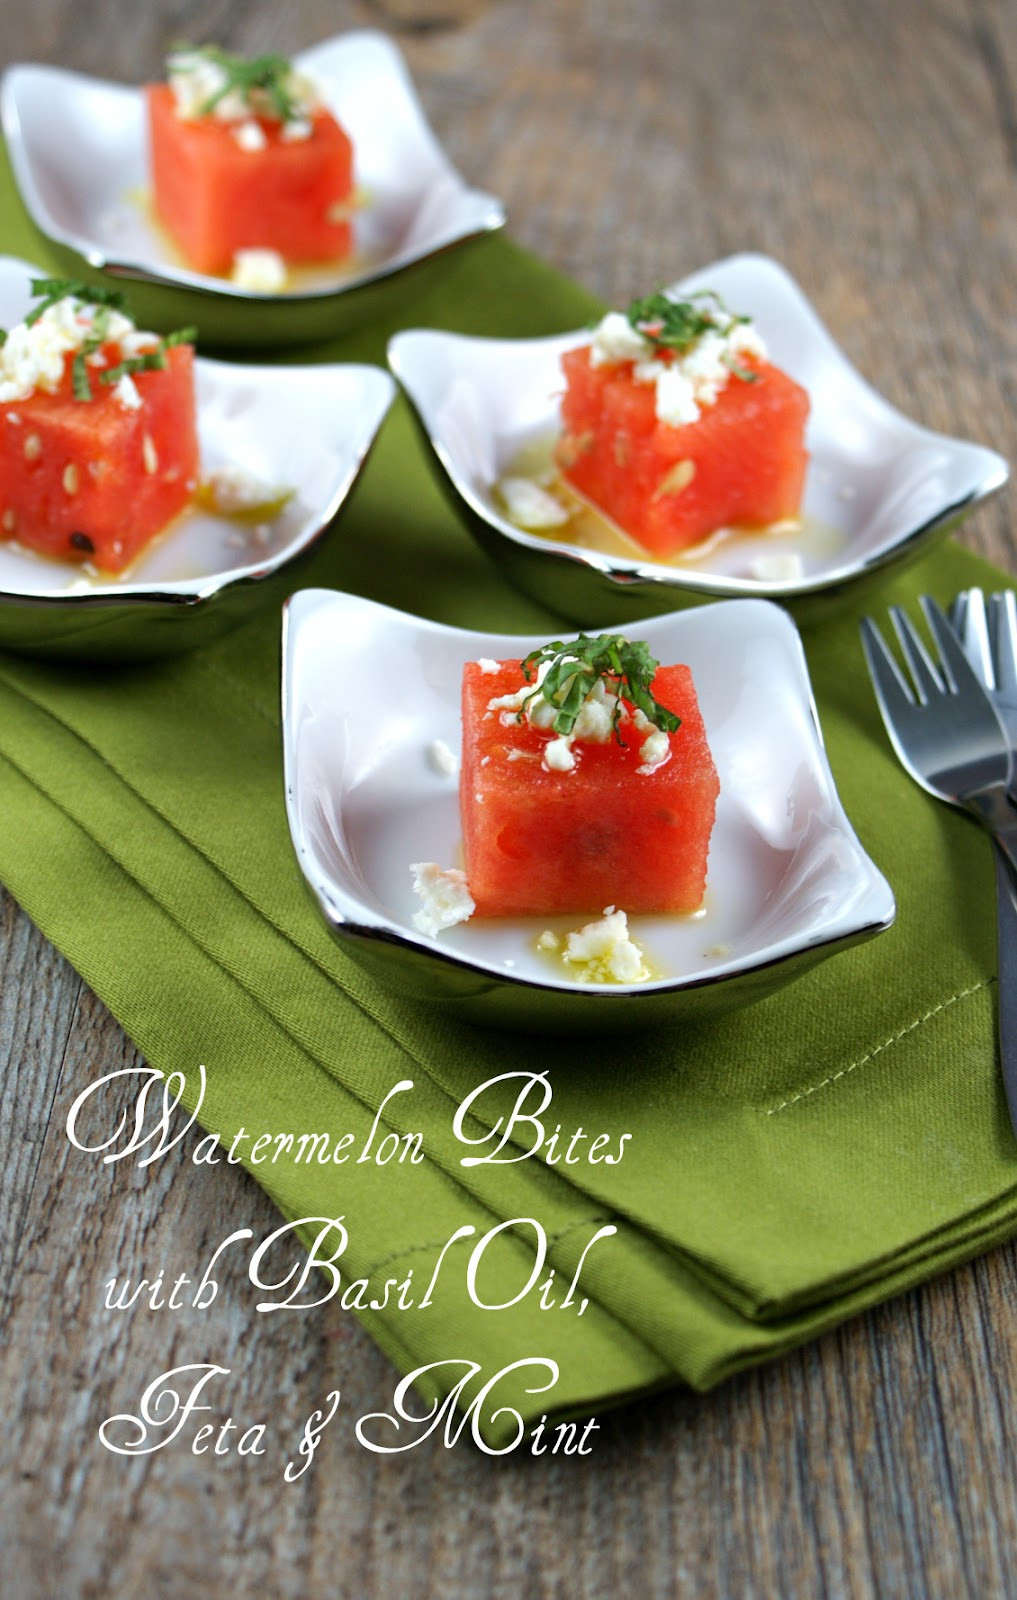 Gourmet Cold Appetizers
 Authentic Suburban Gourmet Watermelon Bites with Basil